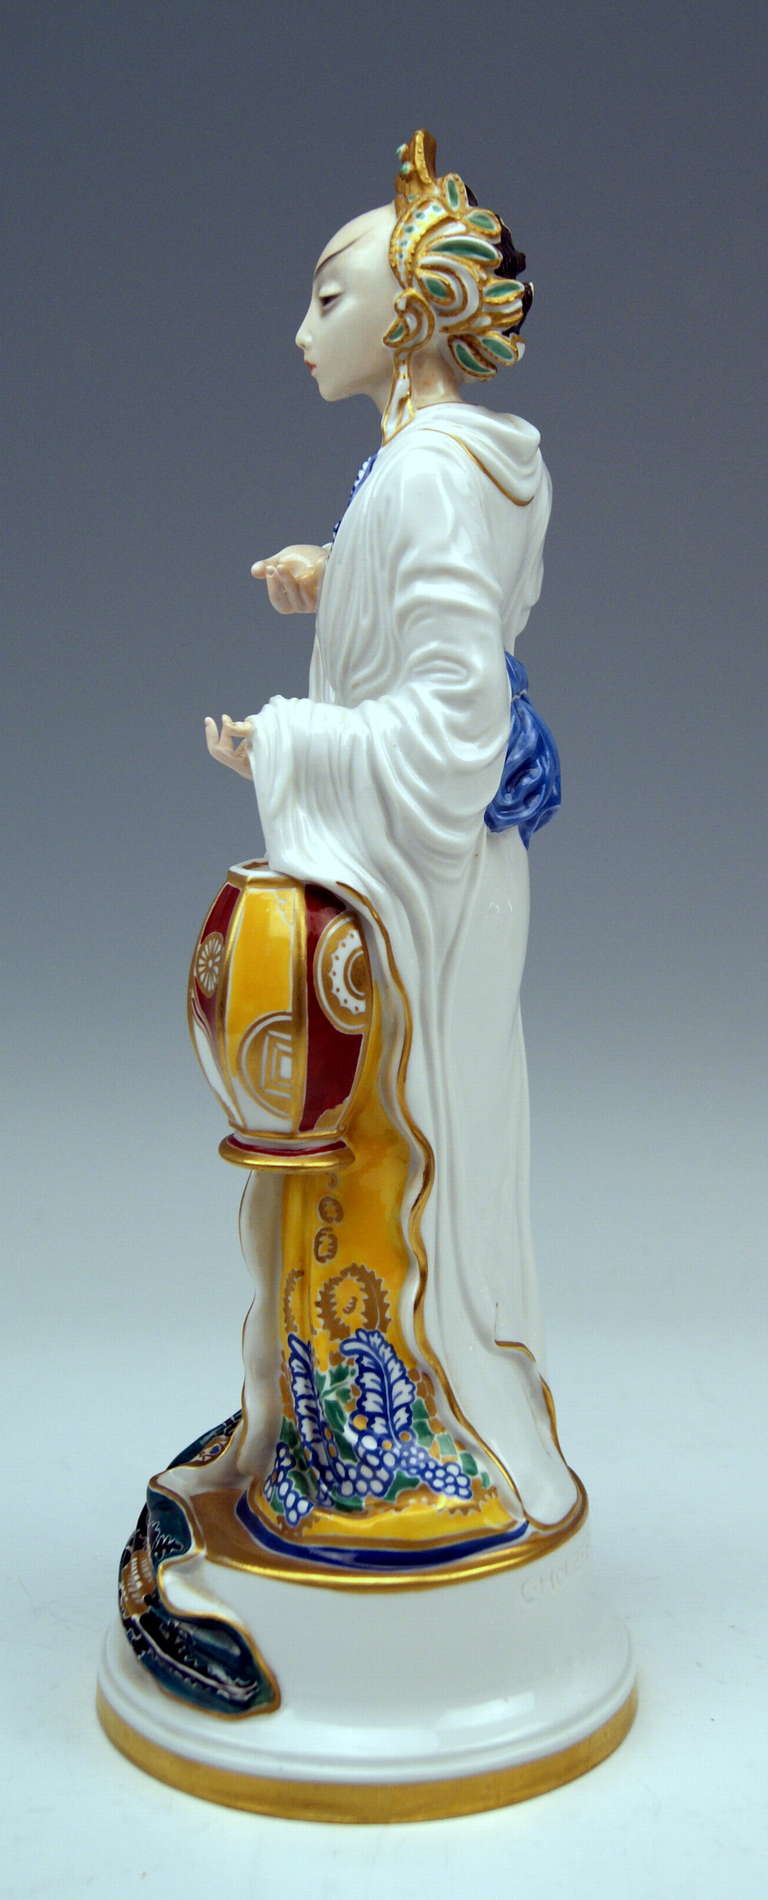 Art Deco Rosenthal Rarest Chinese Lady By Constantin Holzer-defanti Made C. 1920